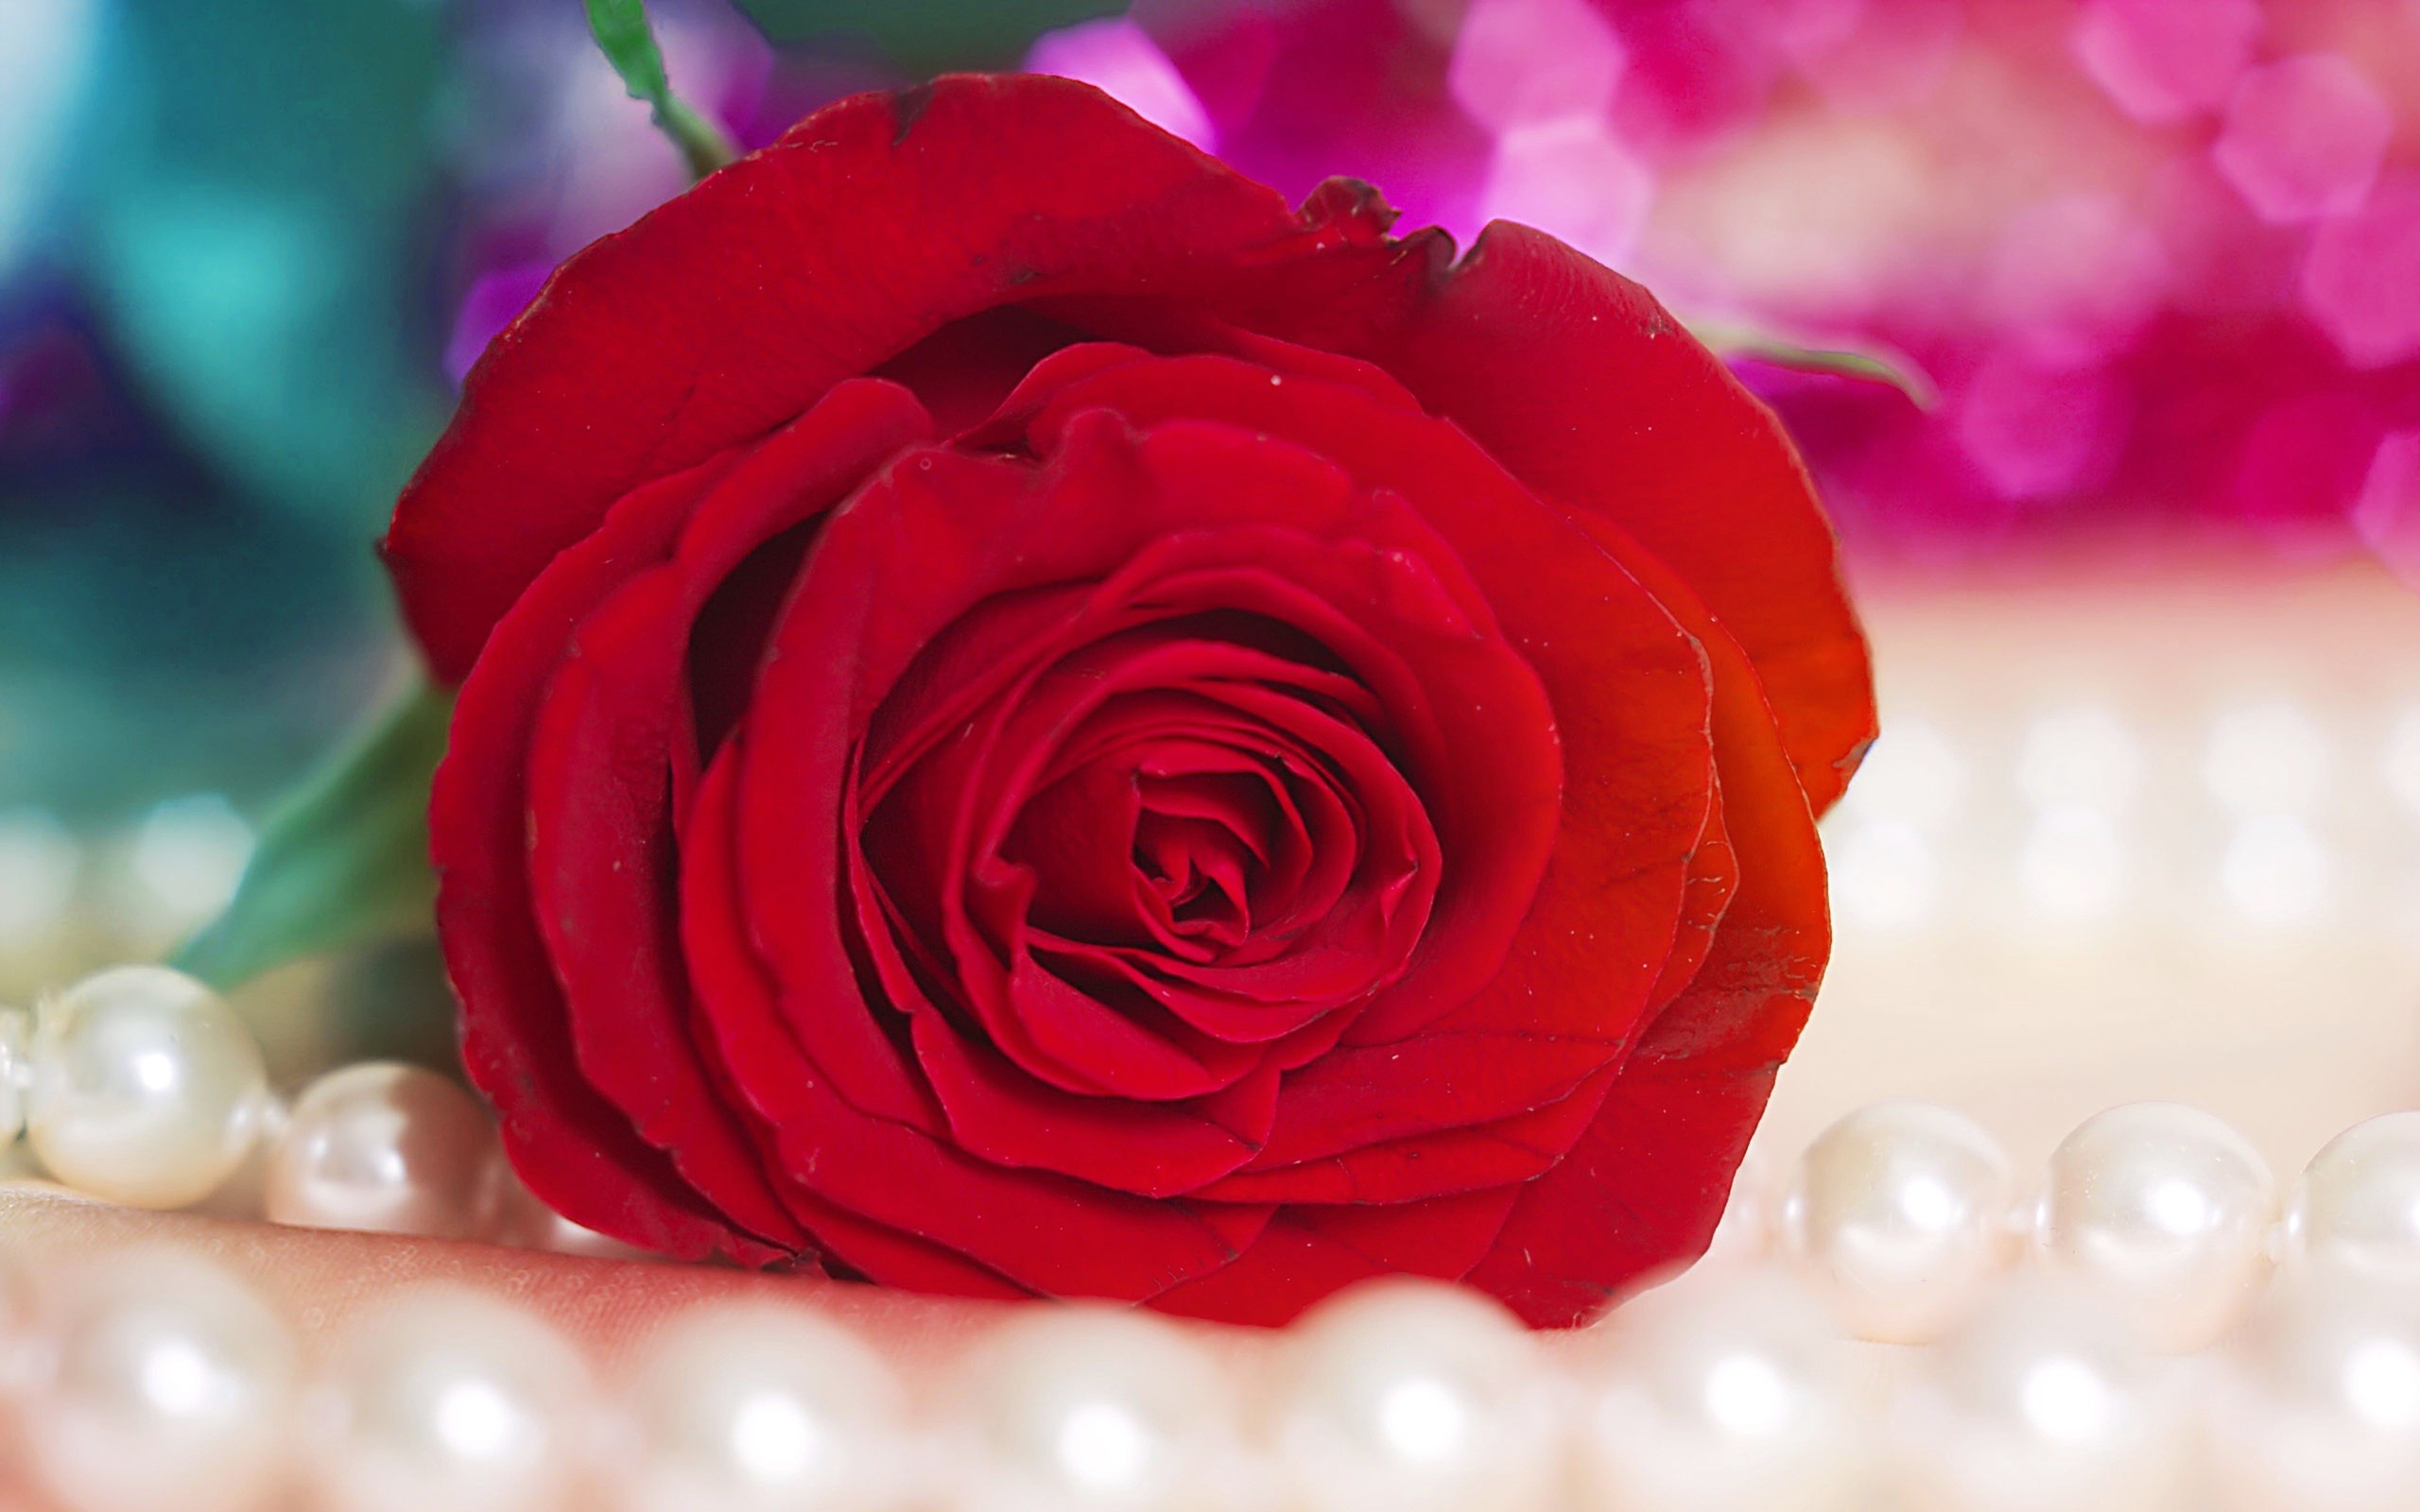 2560x1600 Cute Red Roses Wallpaper 1 Most Beautiful Red Rose Flowers Wallpapers